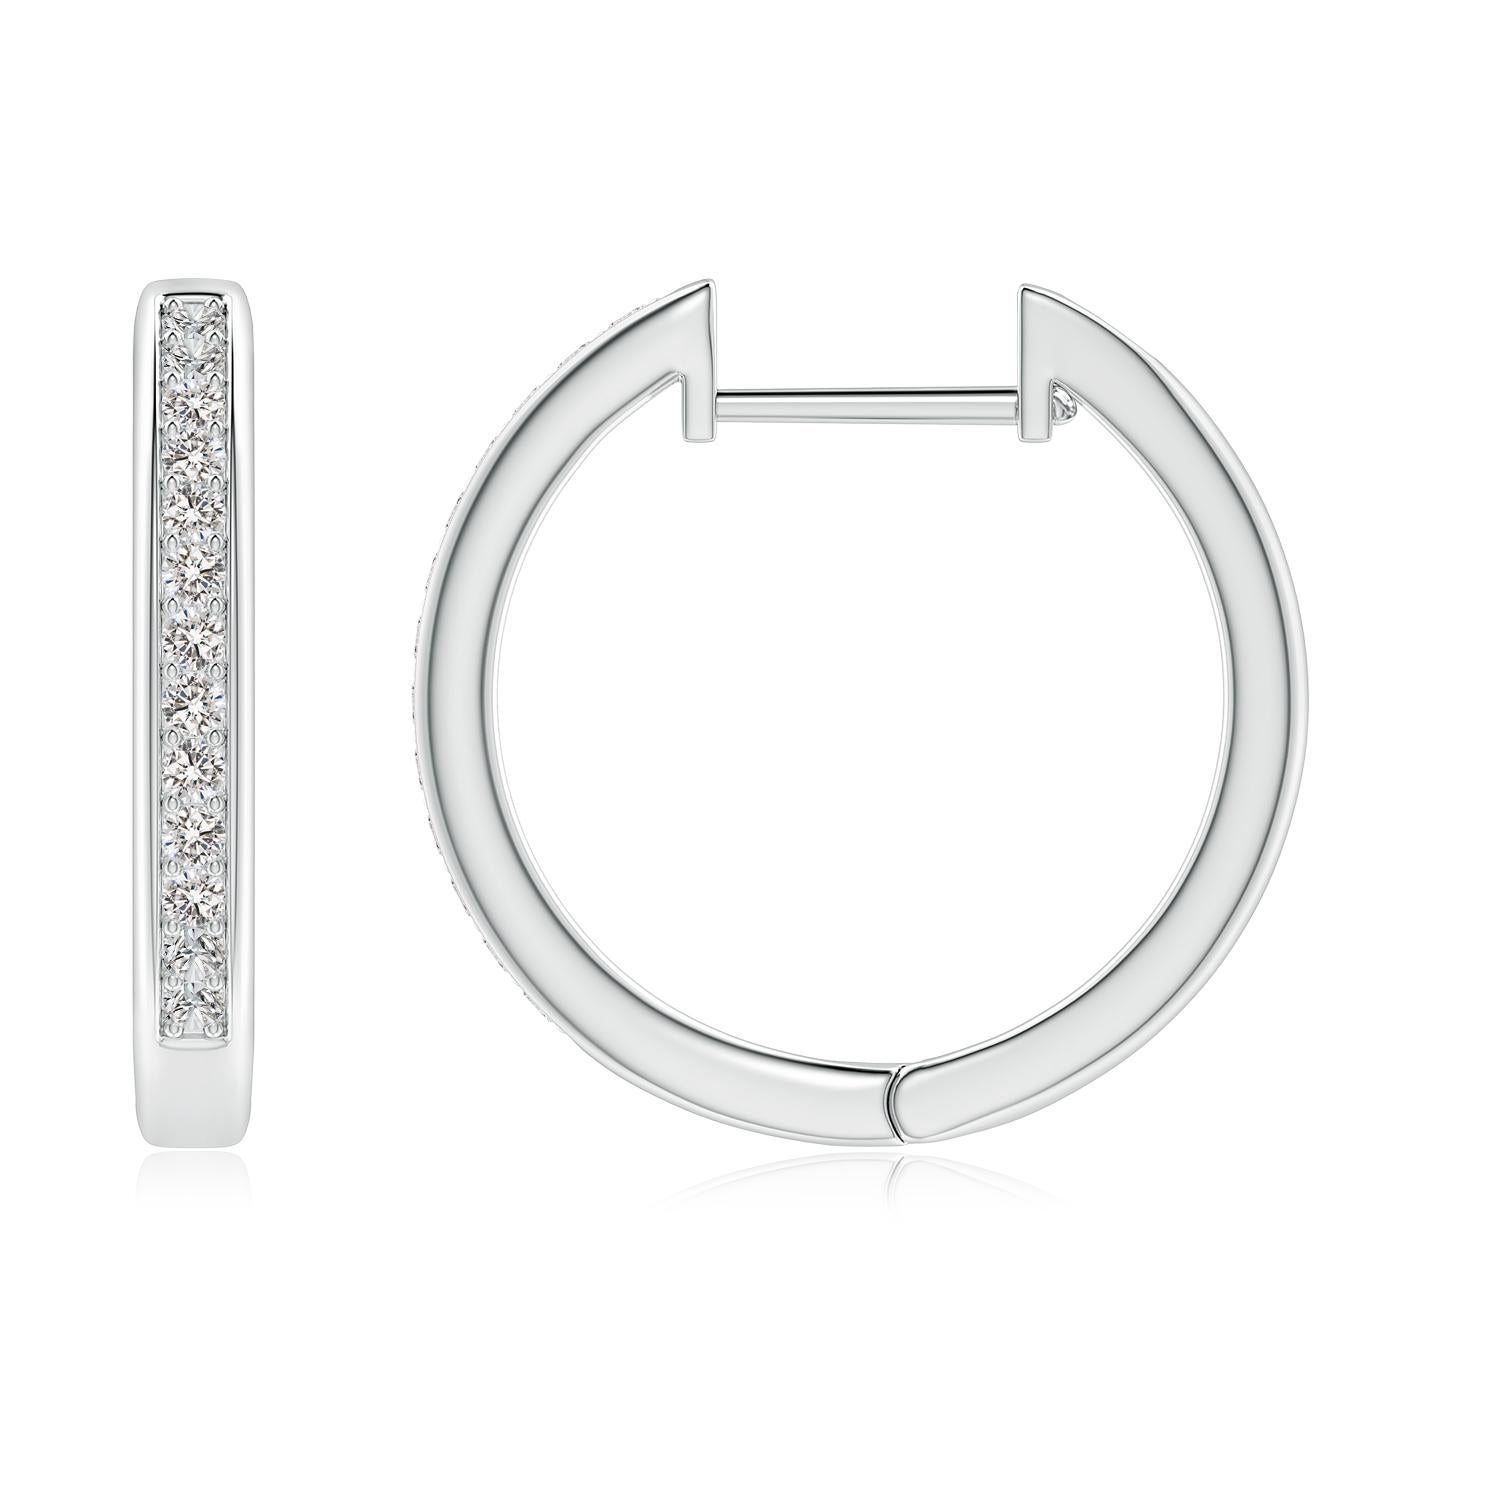 Round Cut Natural Diamond Hoop Earrings in 14K White Gold 0.33cttw Color-I-J Clarity-I1-I2 For Sale